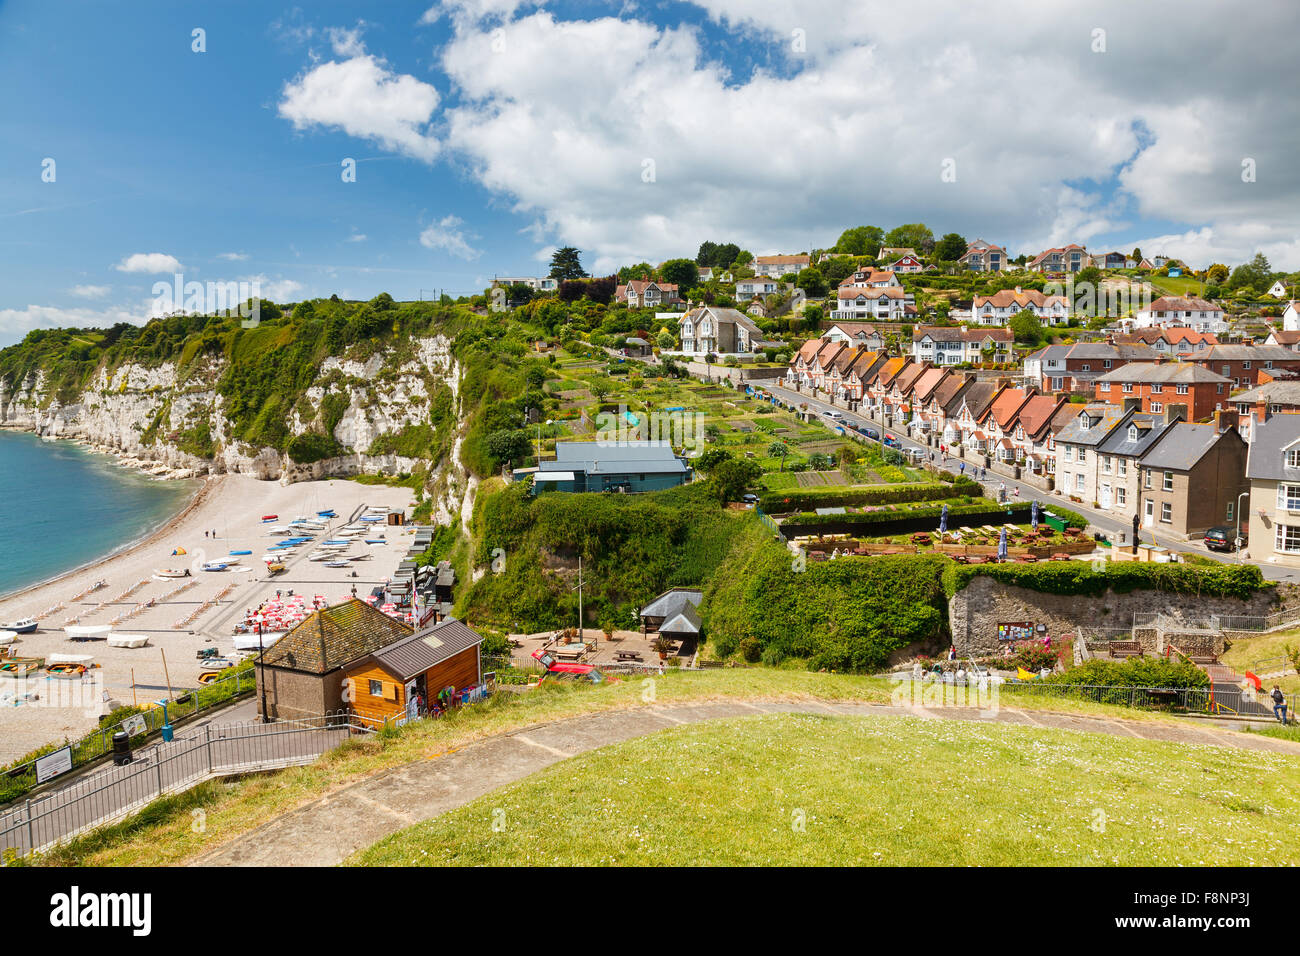 Overlooking the beach village at Beer in Lyme Bay Devon England UK Europe Stock Photo